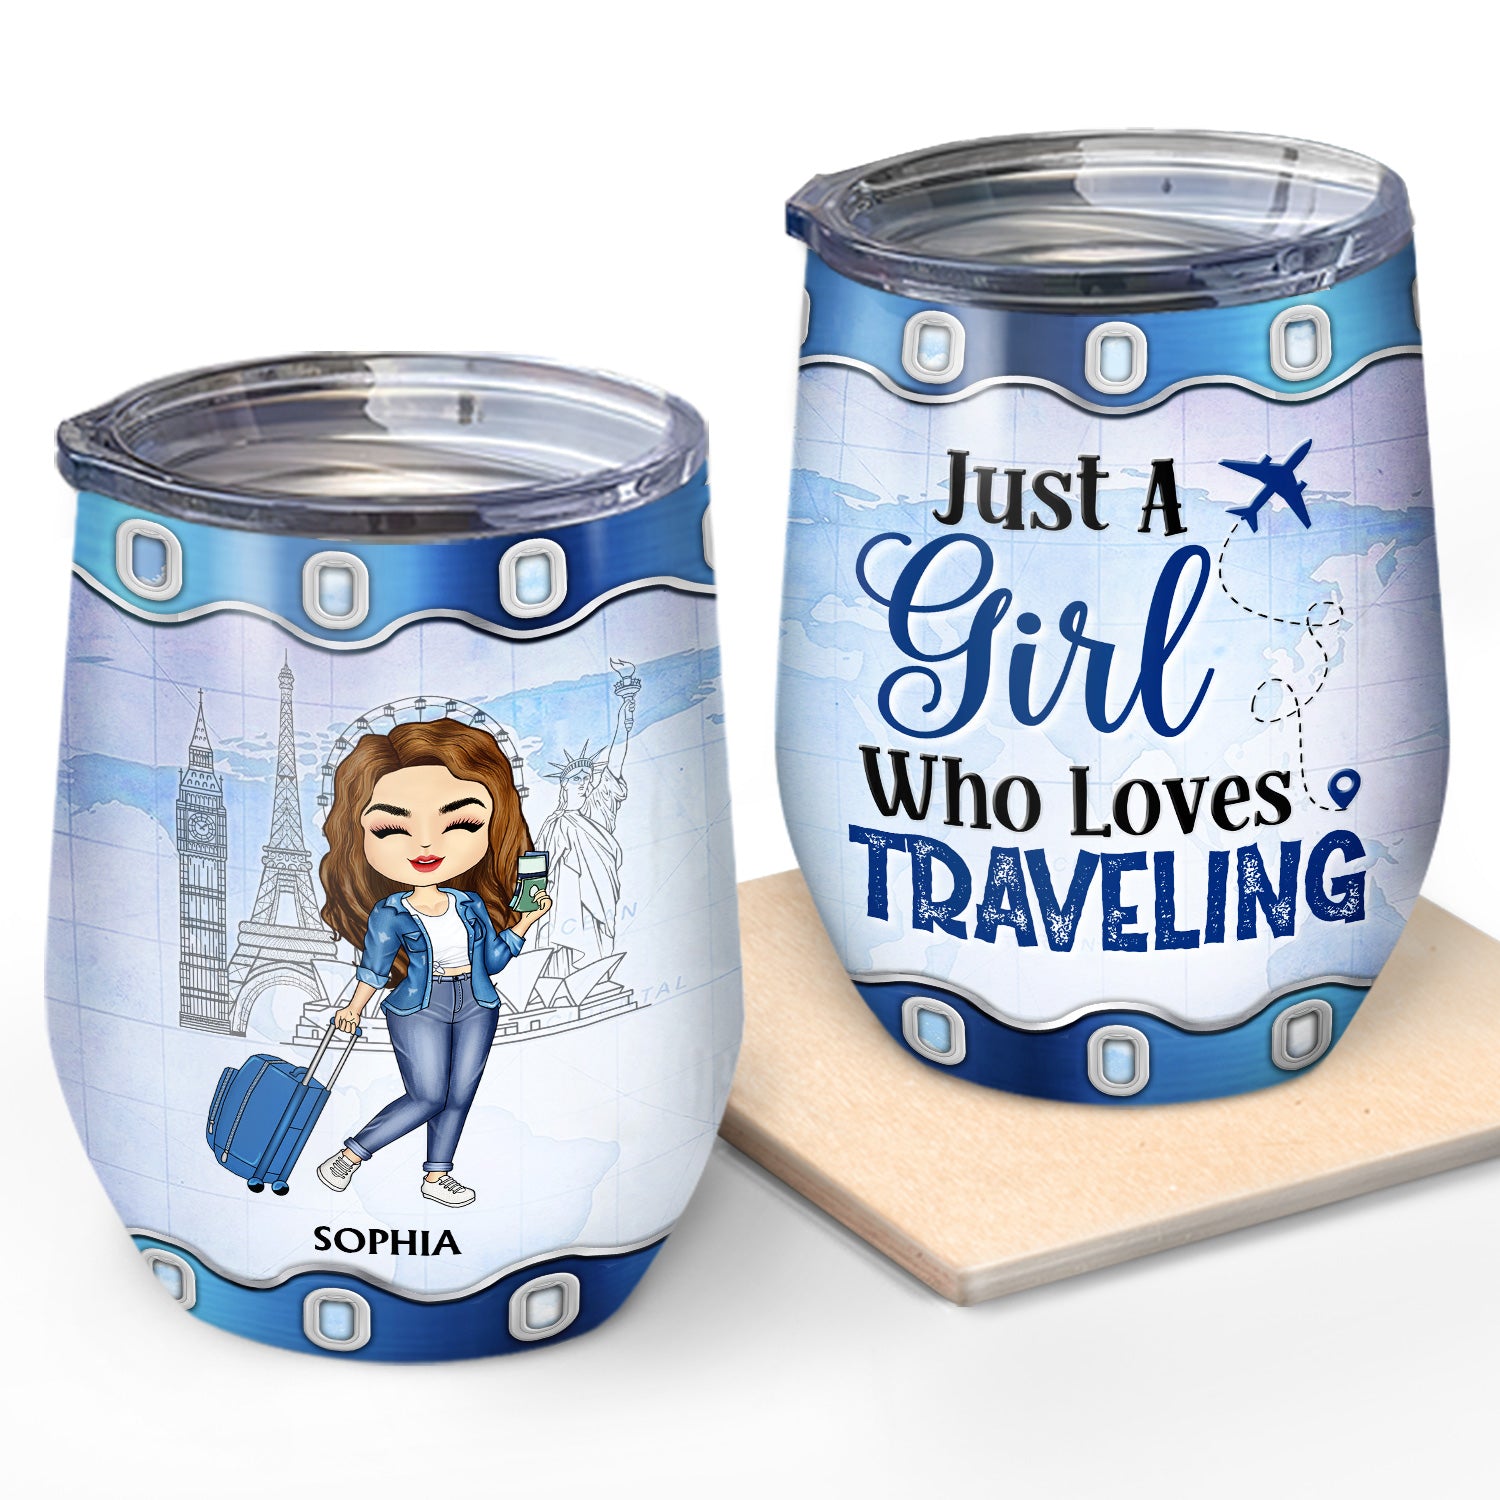 Just A Girl Boy Who Loves Traveling Cruising - Birthday Gift For Him, Her, Kid, Friends, Family, Trippin', Vacation Lovers - Personalized Custom Wine Tumbler